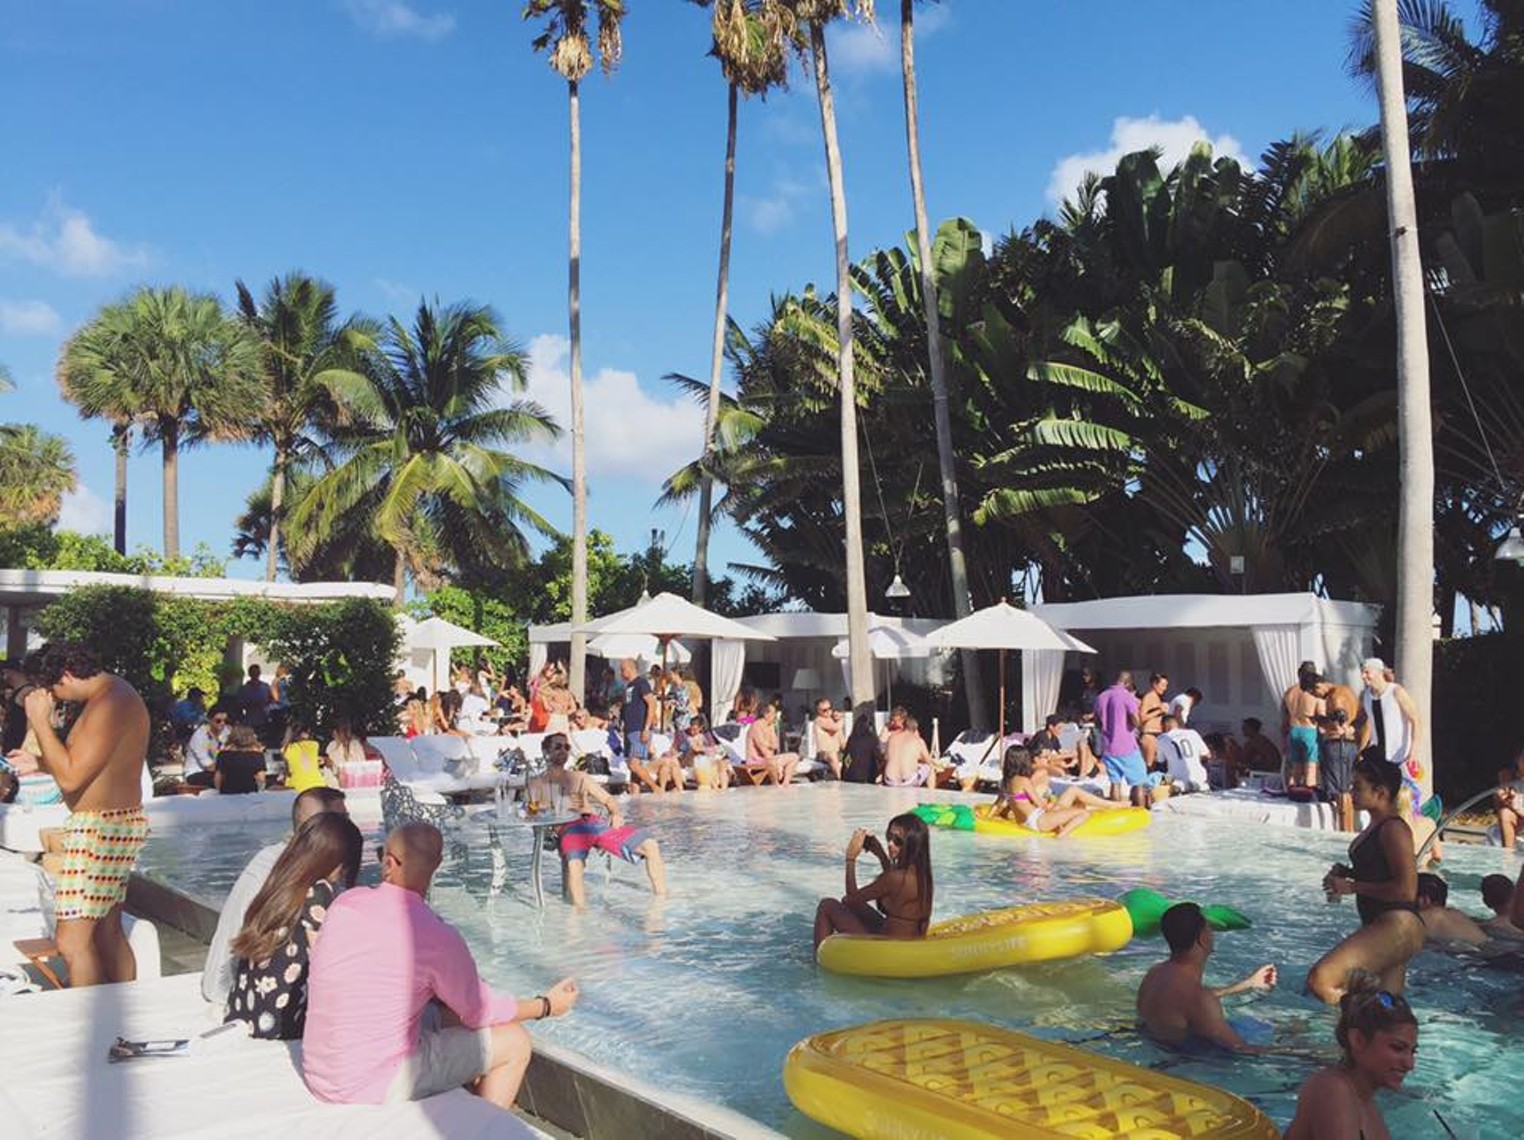 Capt. Stan's Deep Sea Chronicles: Labor Day Pool Parties in Miami Beach